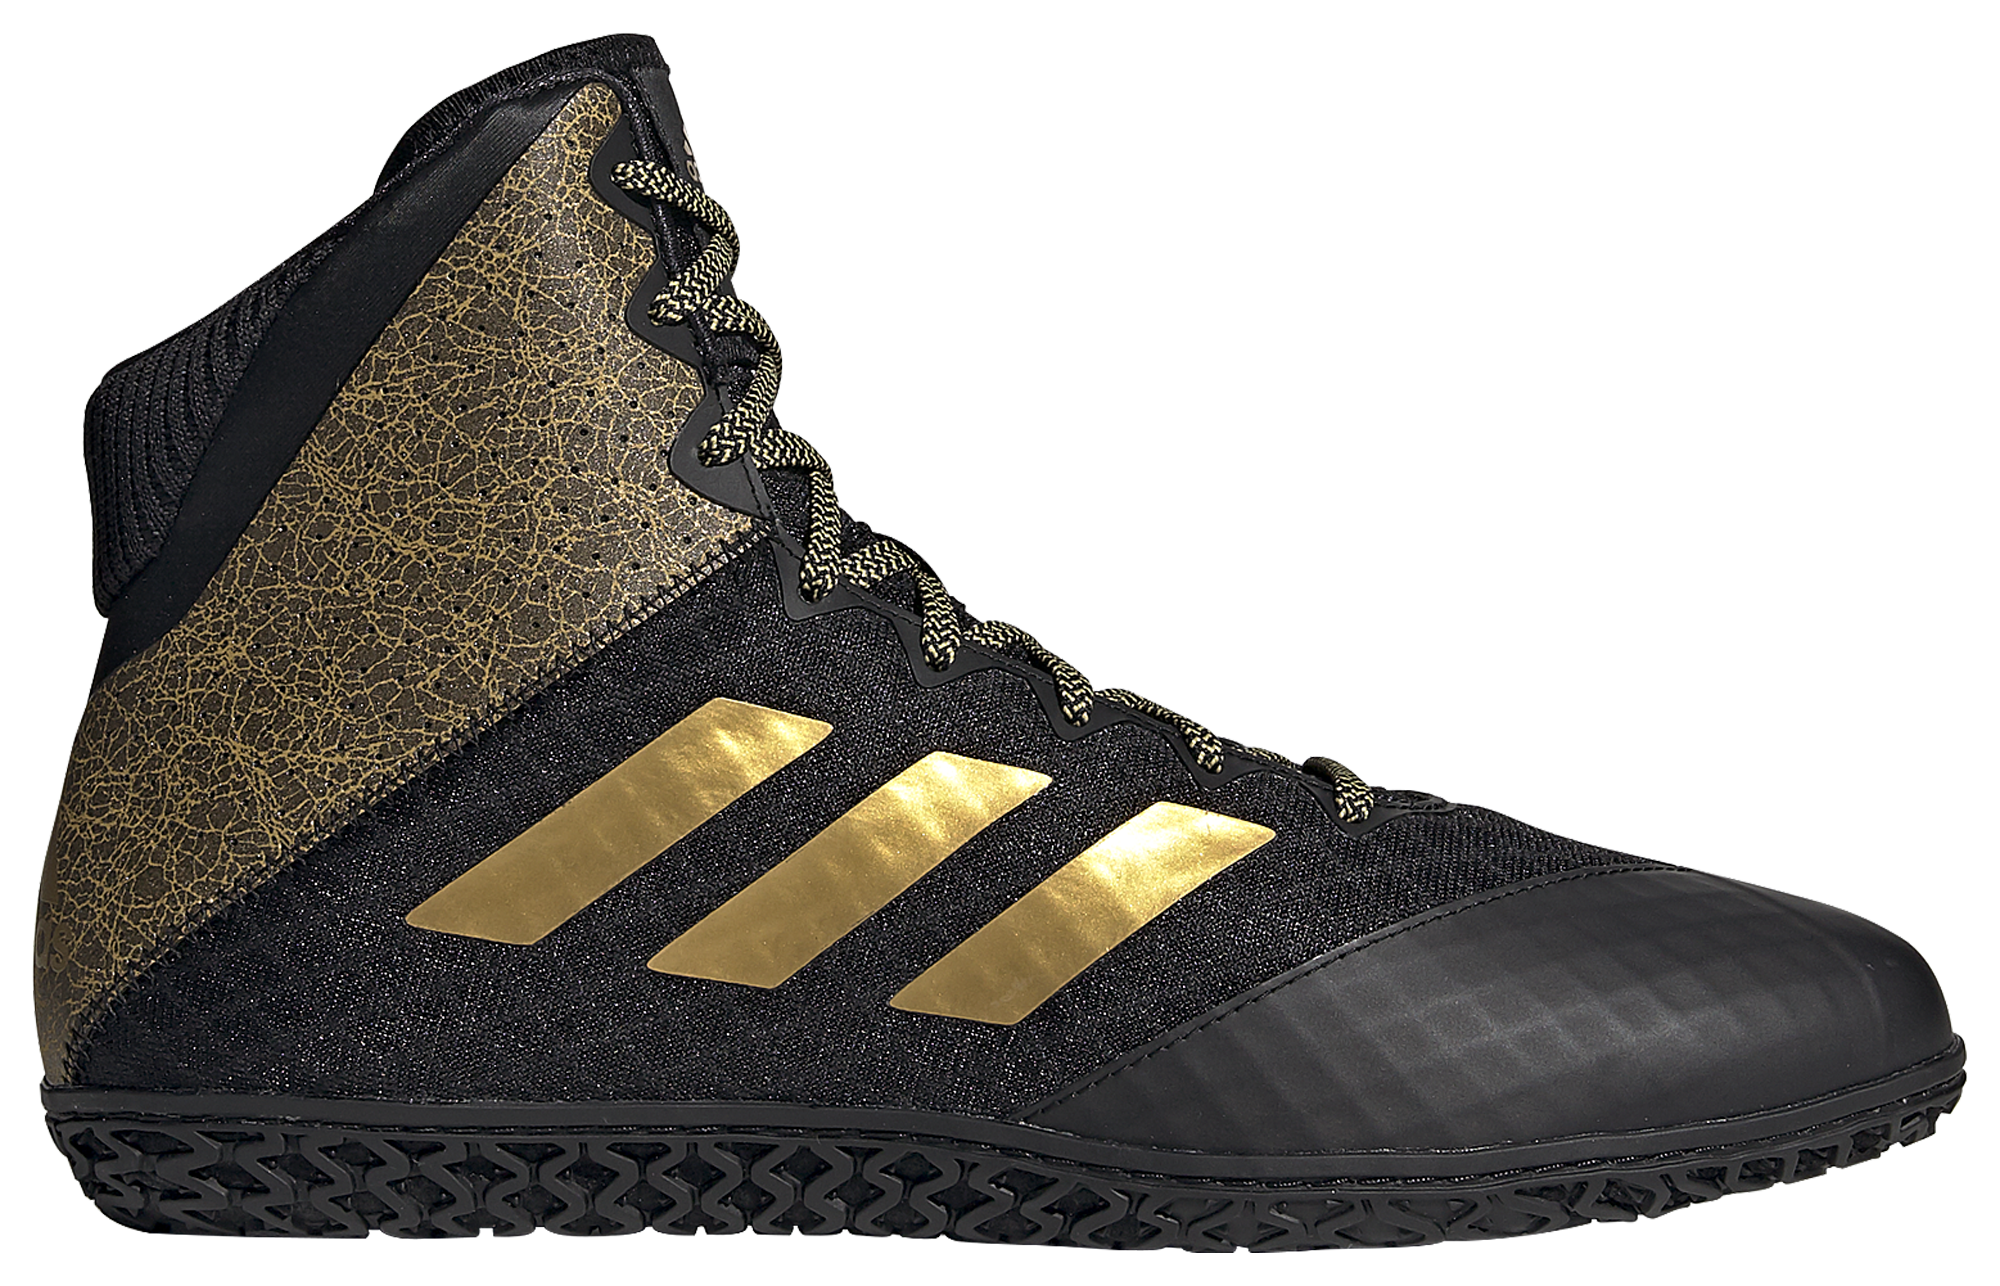 white and gold adidas wrestling shoes